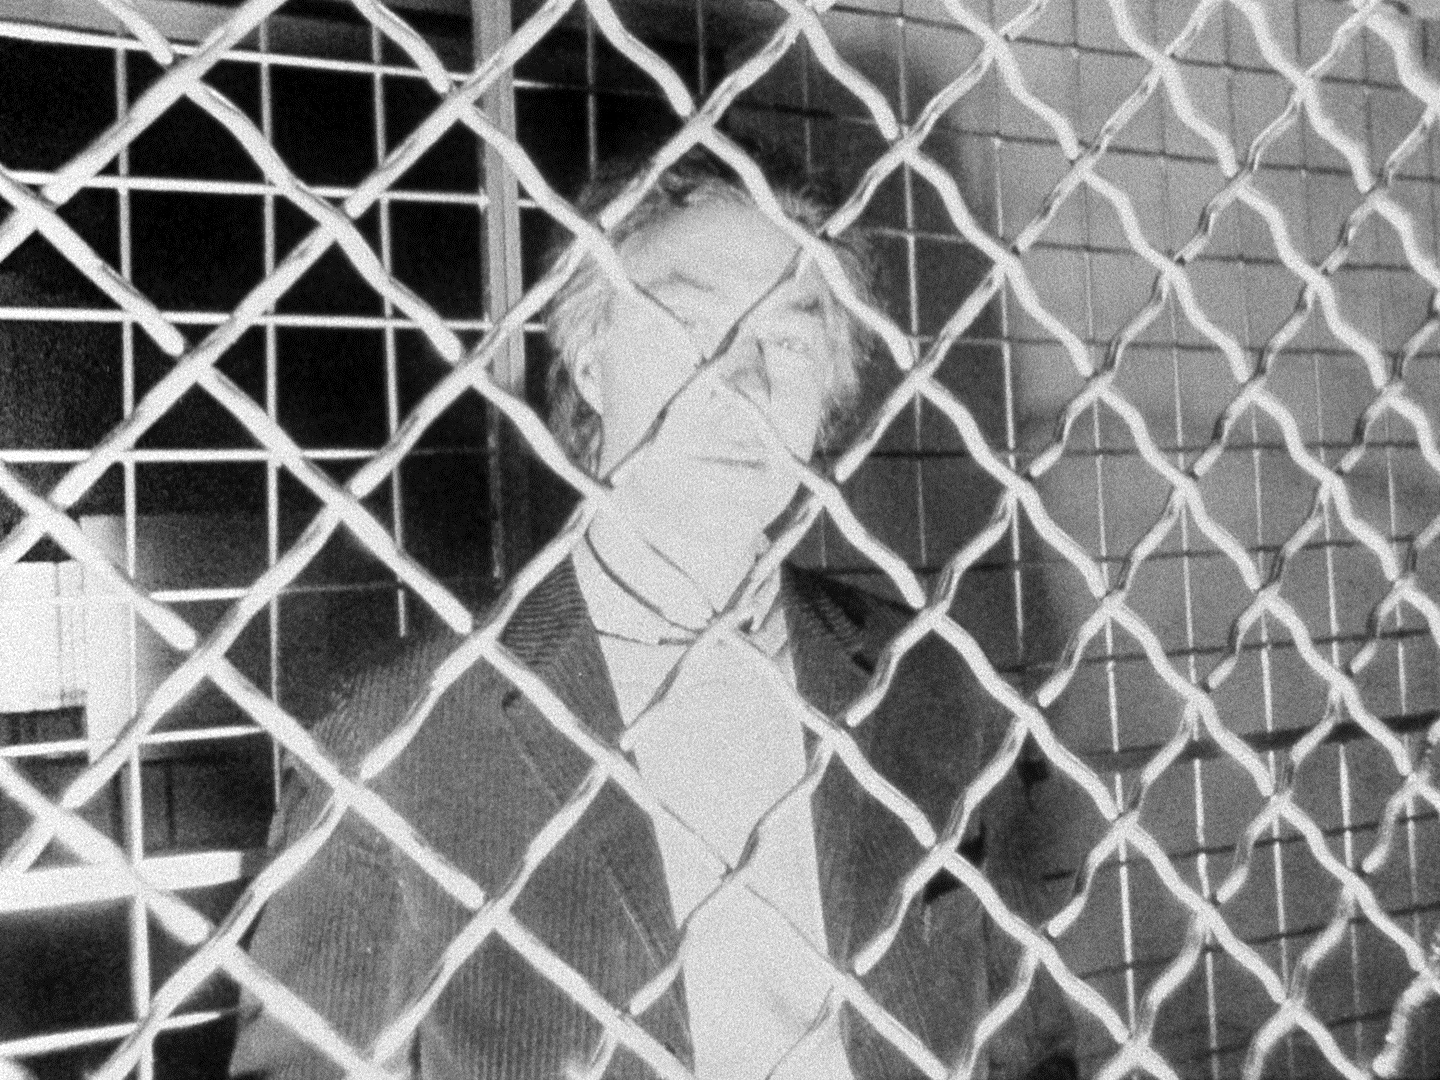 An over-exposed image of a man standing between mesh screens. A strong light turns much of his face into a pale blur.